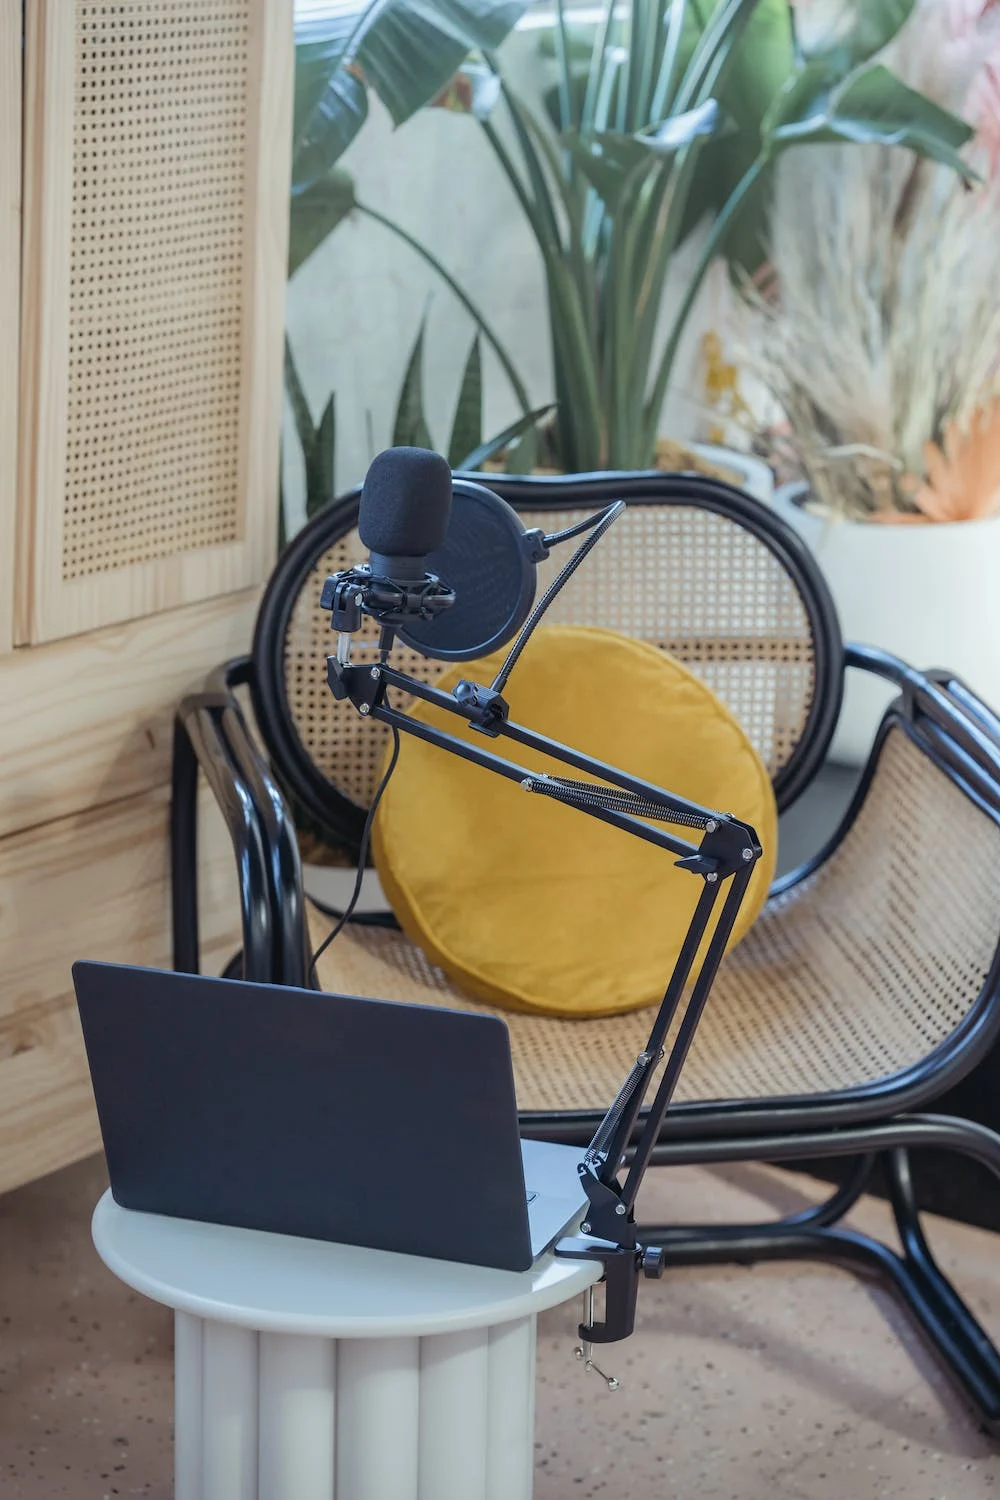 This is for a post about how to start your own podcast. The image is of a podcast set up with a chair, computer, and microphone.